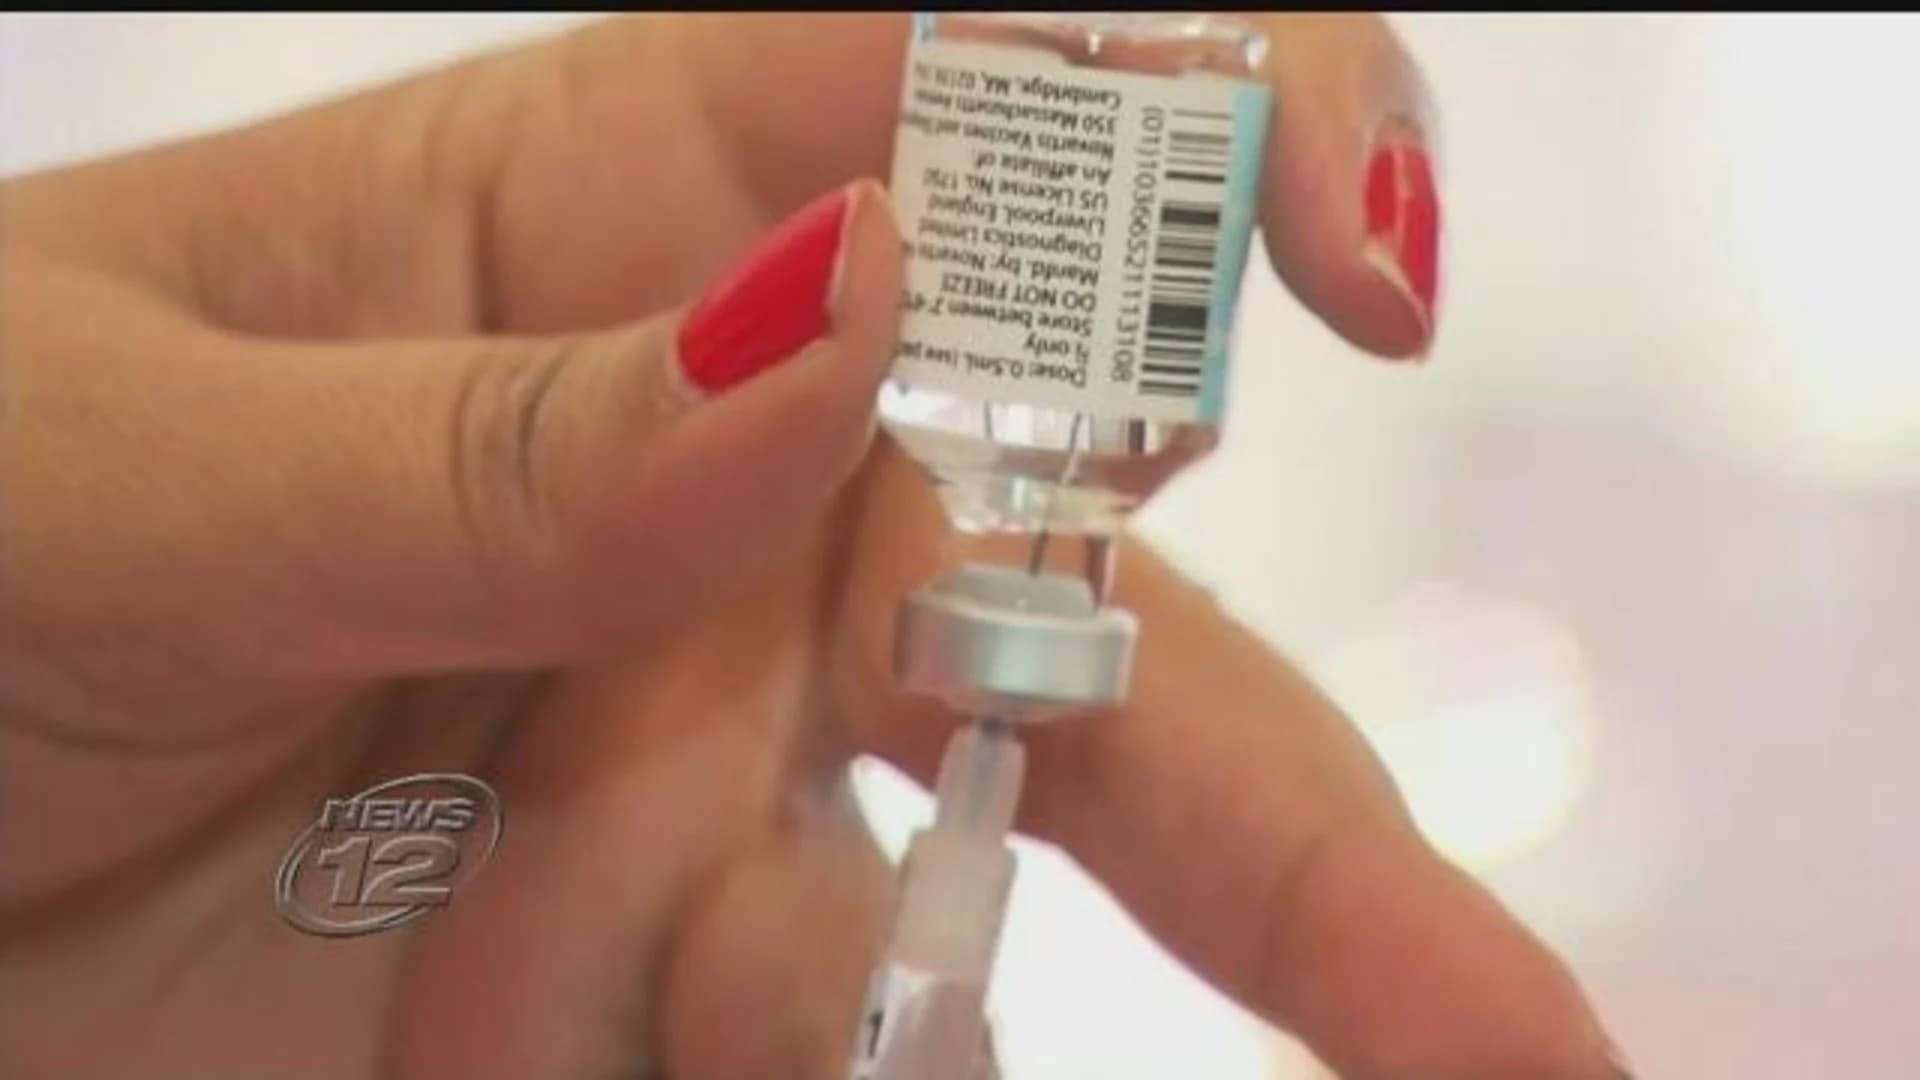 Doctors say it’s never too late to get a flu shot